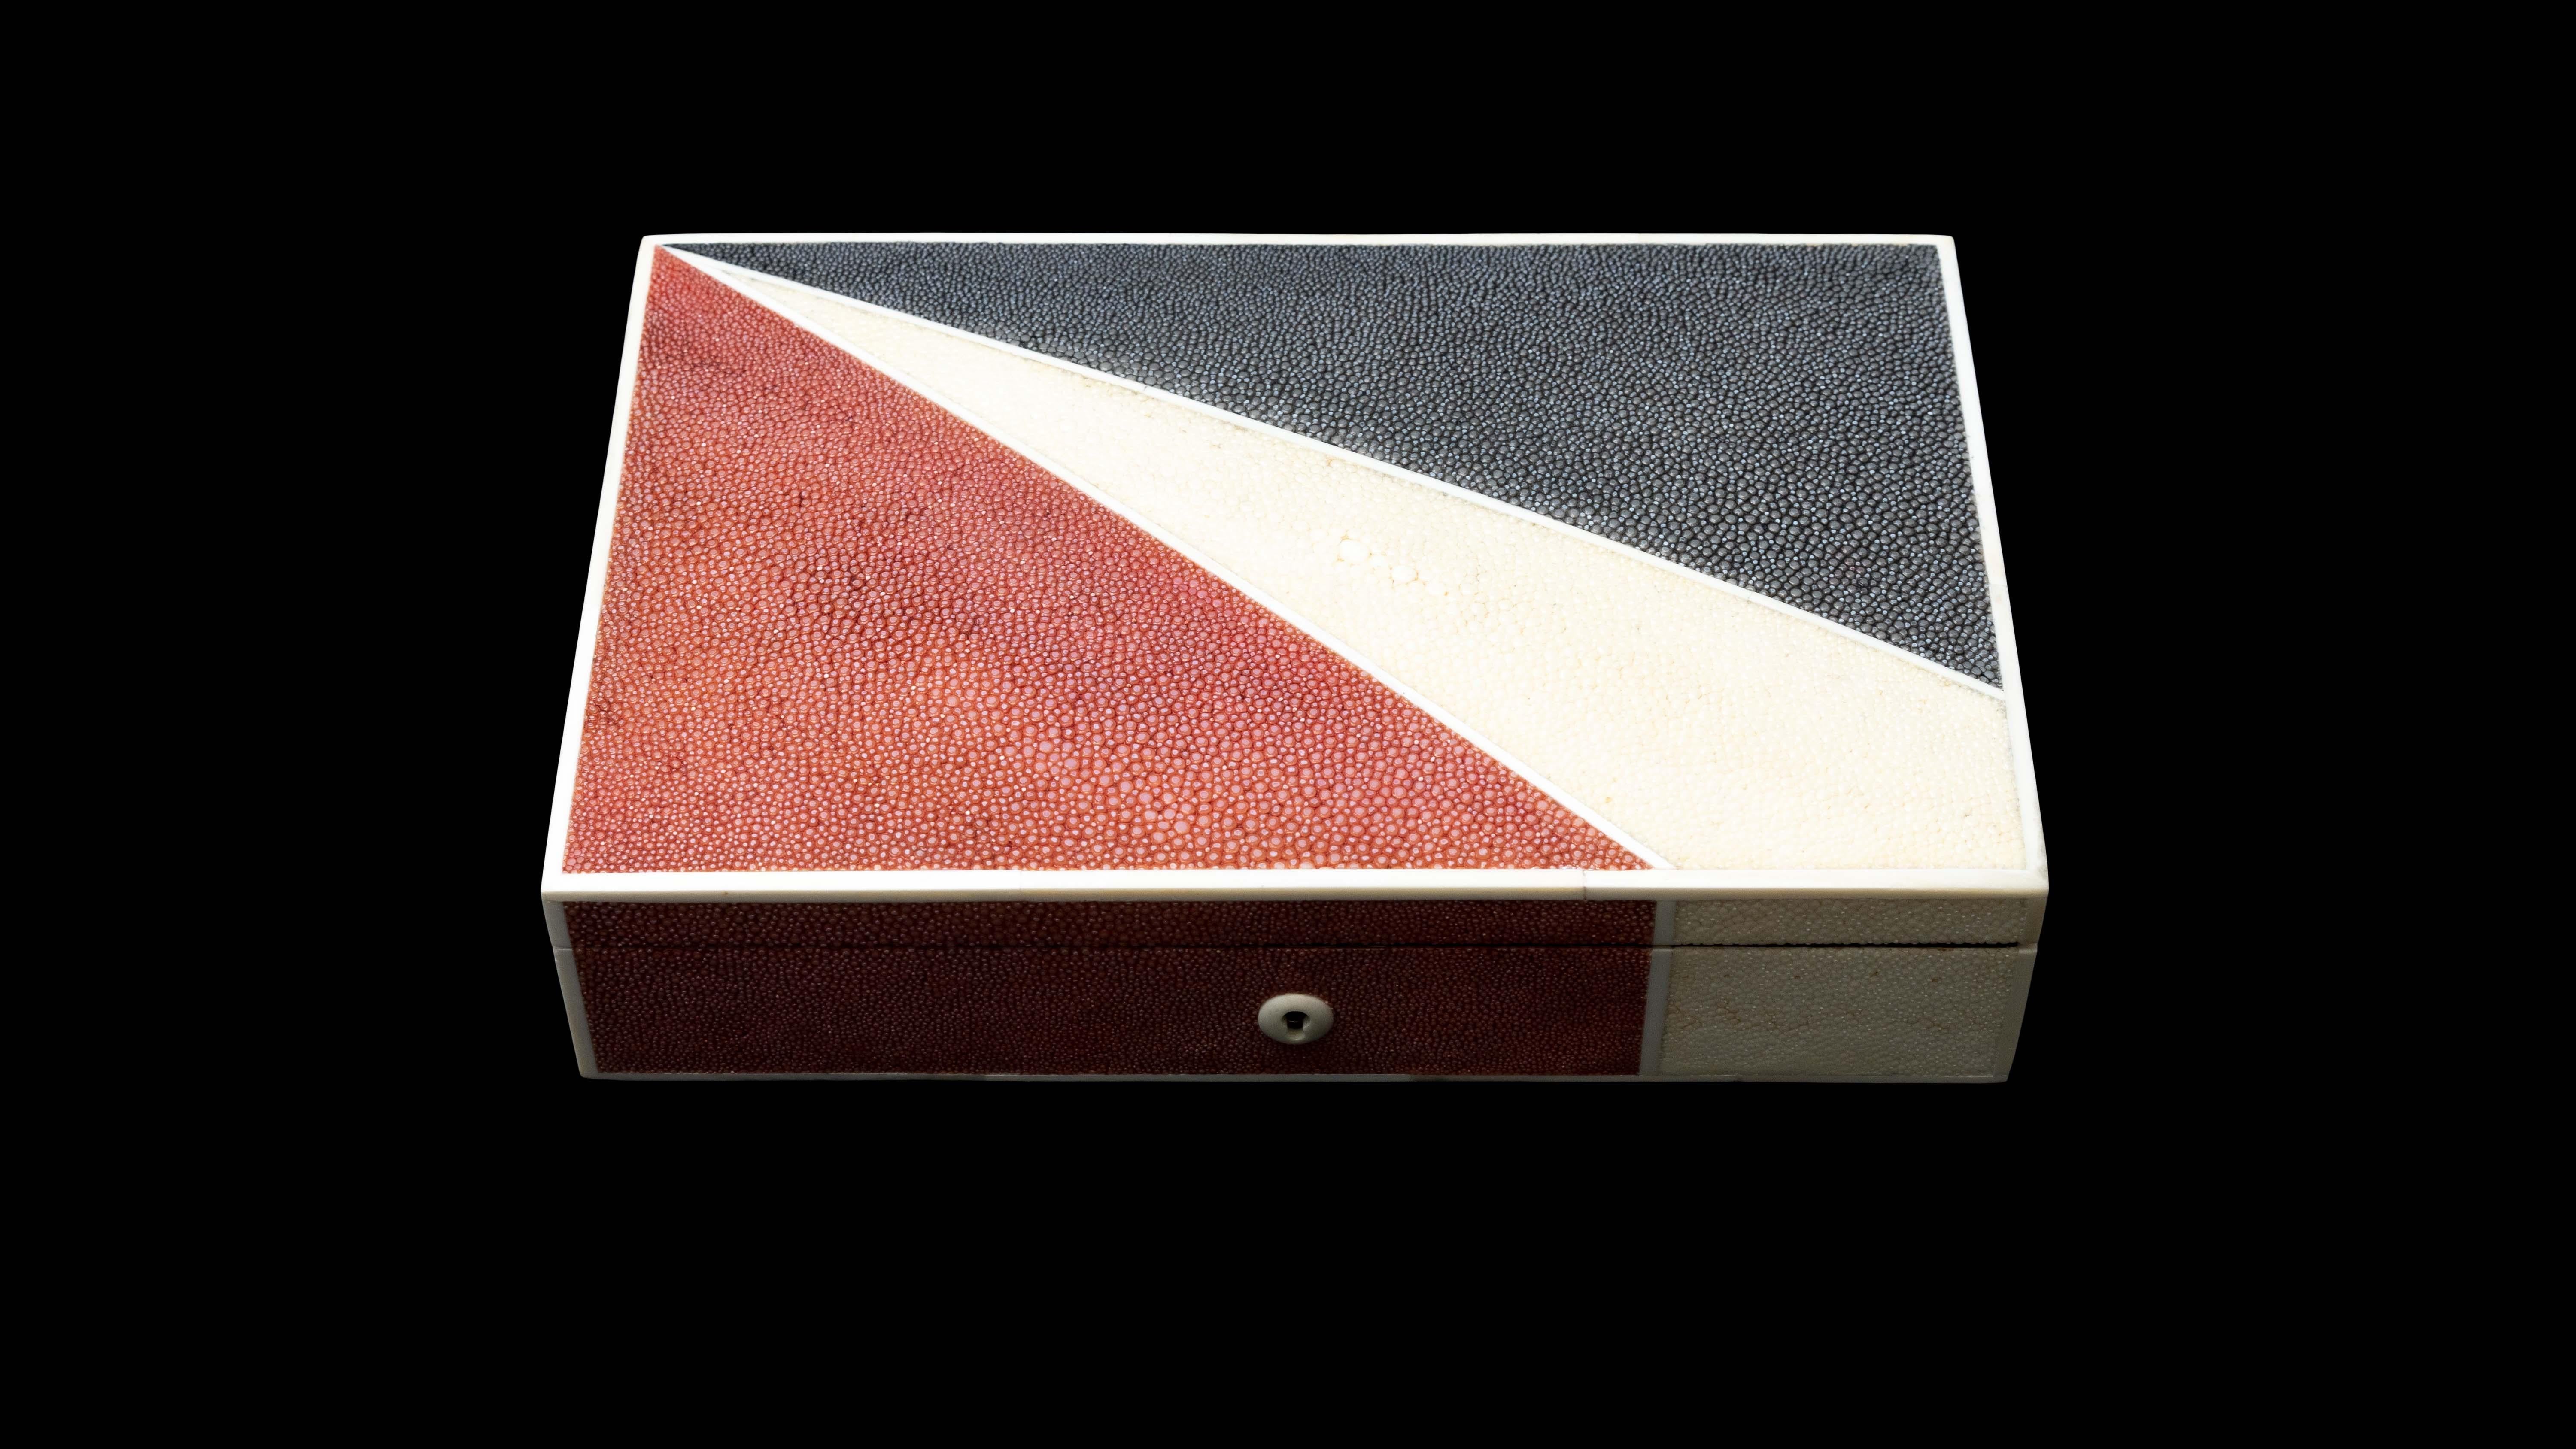 Red cream & black Shagreen box

Measures approximately: 10